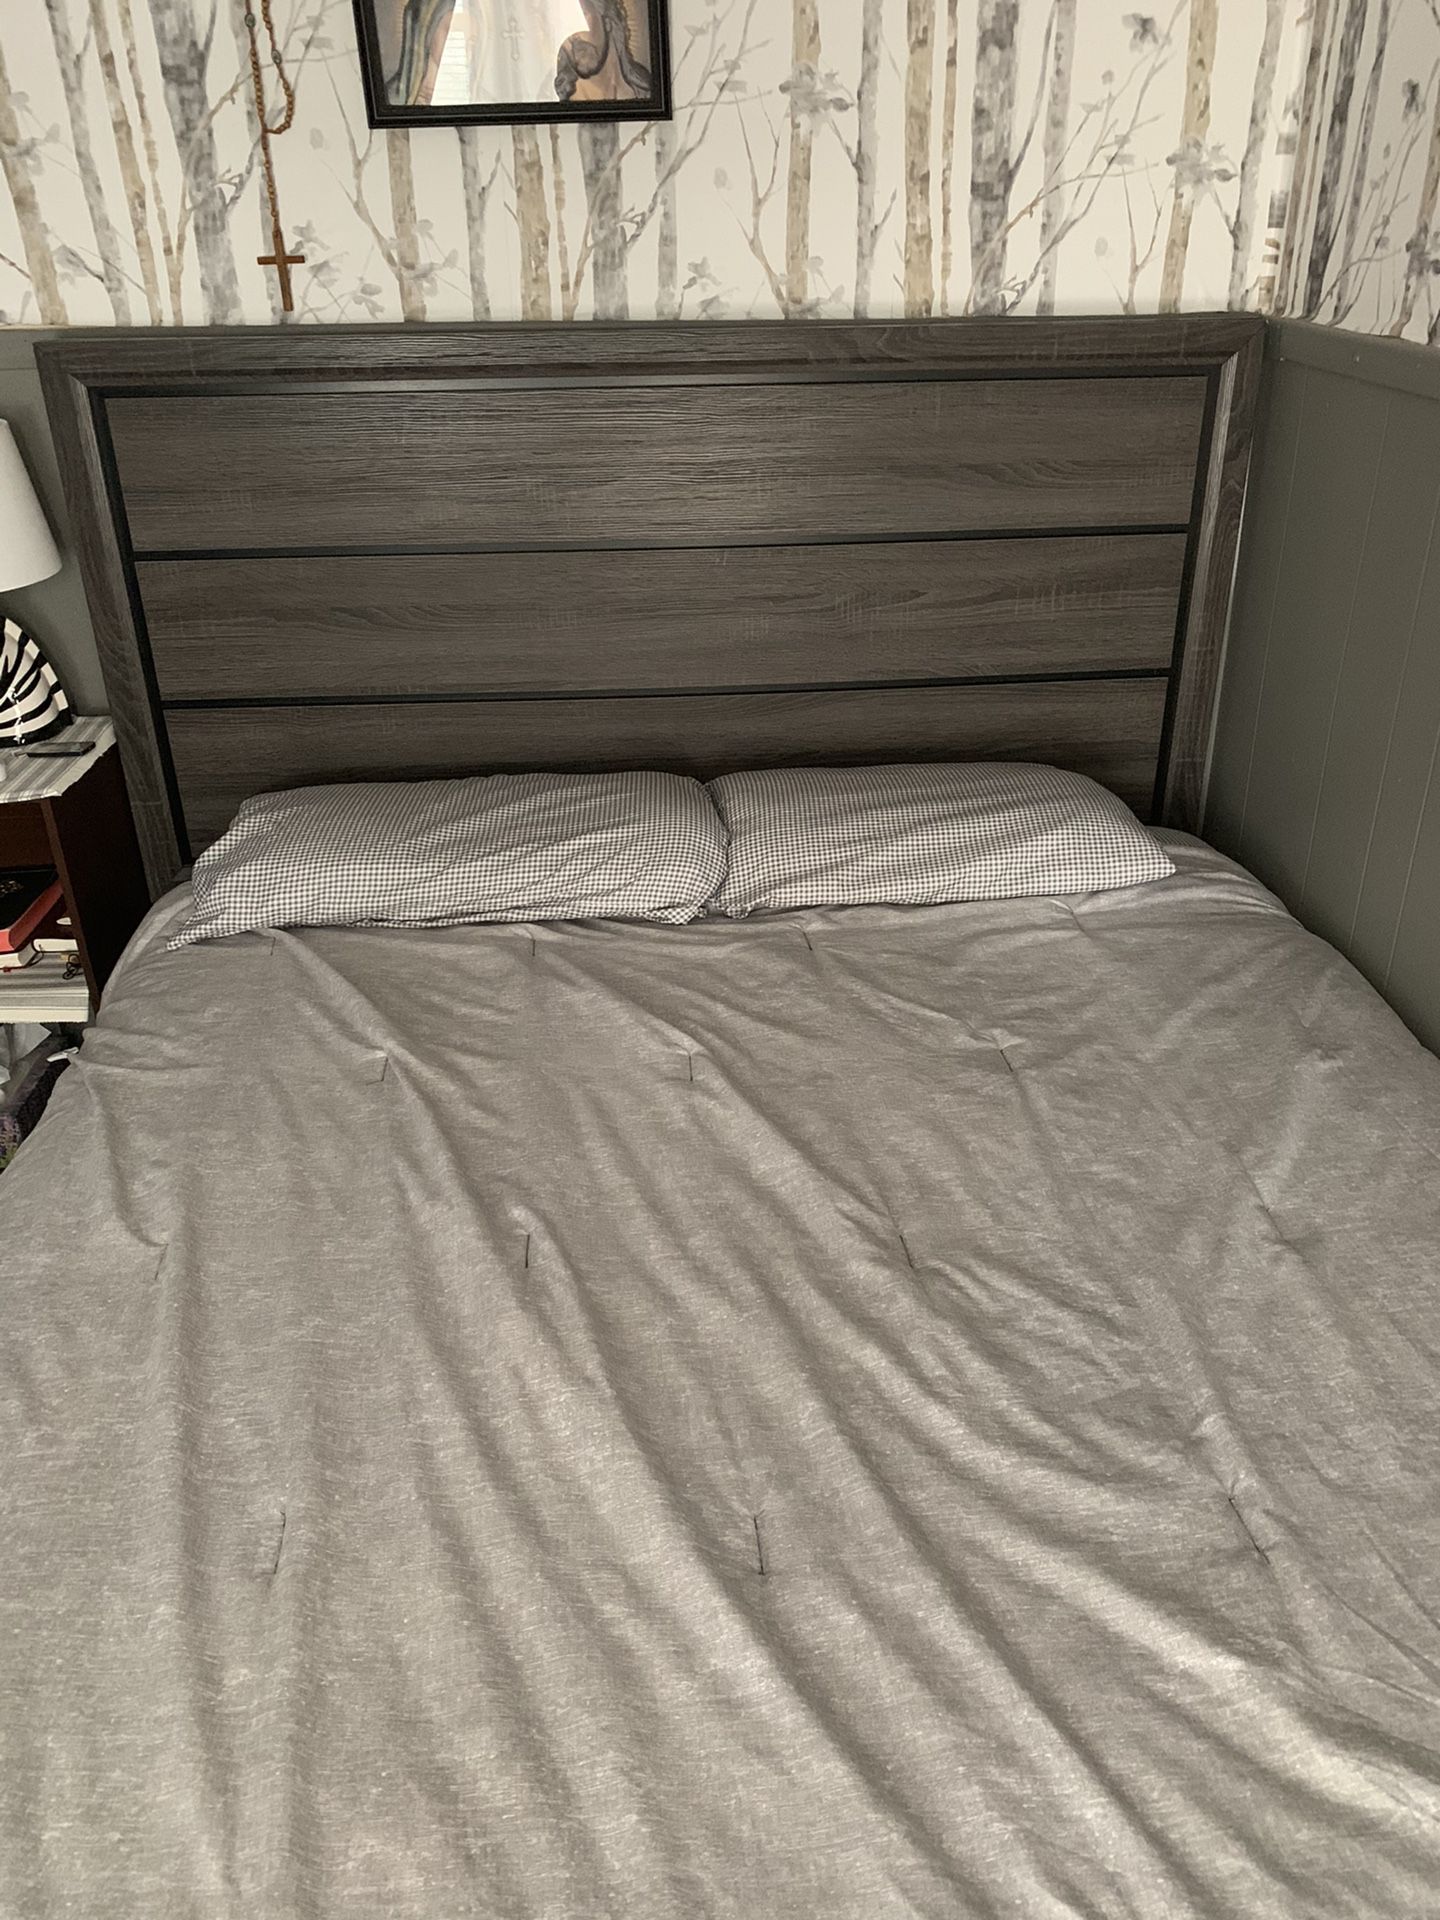 New Queen size bed box included ( will deliver and assemble )